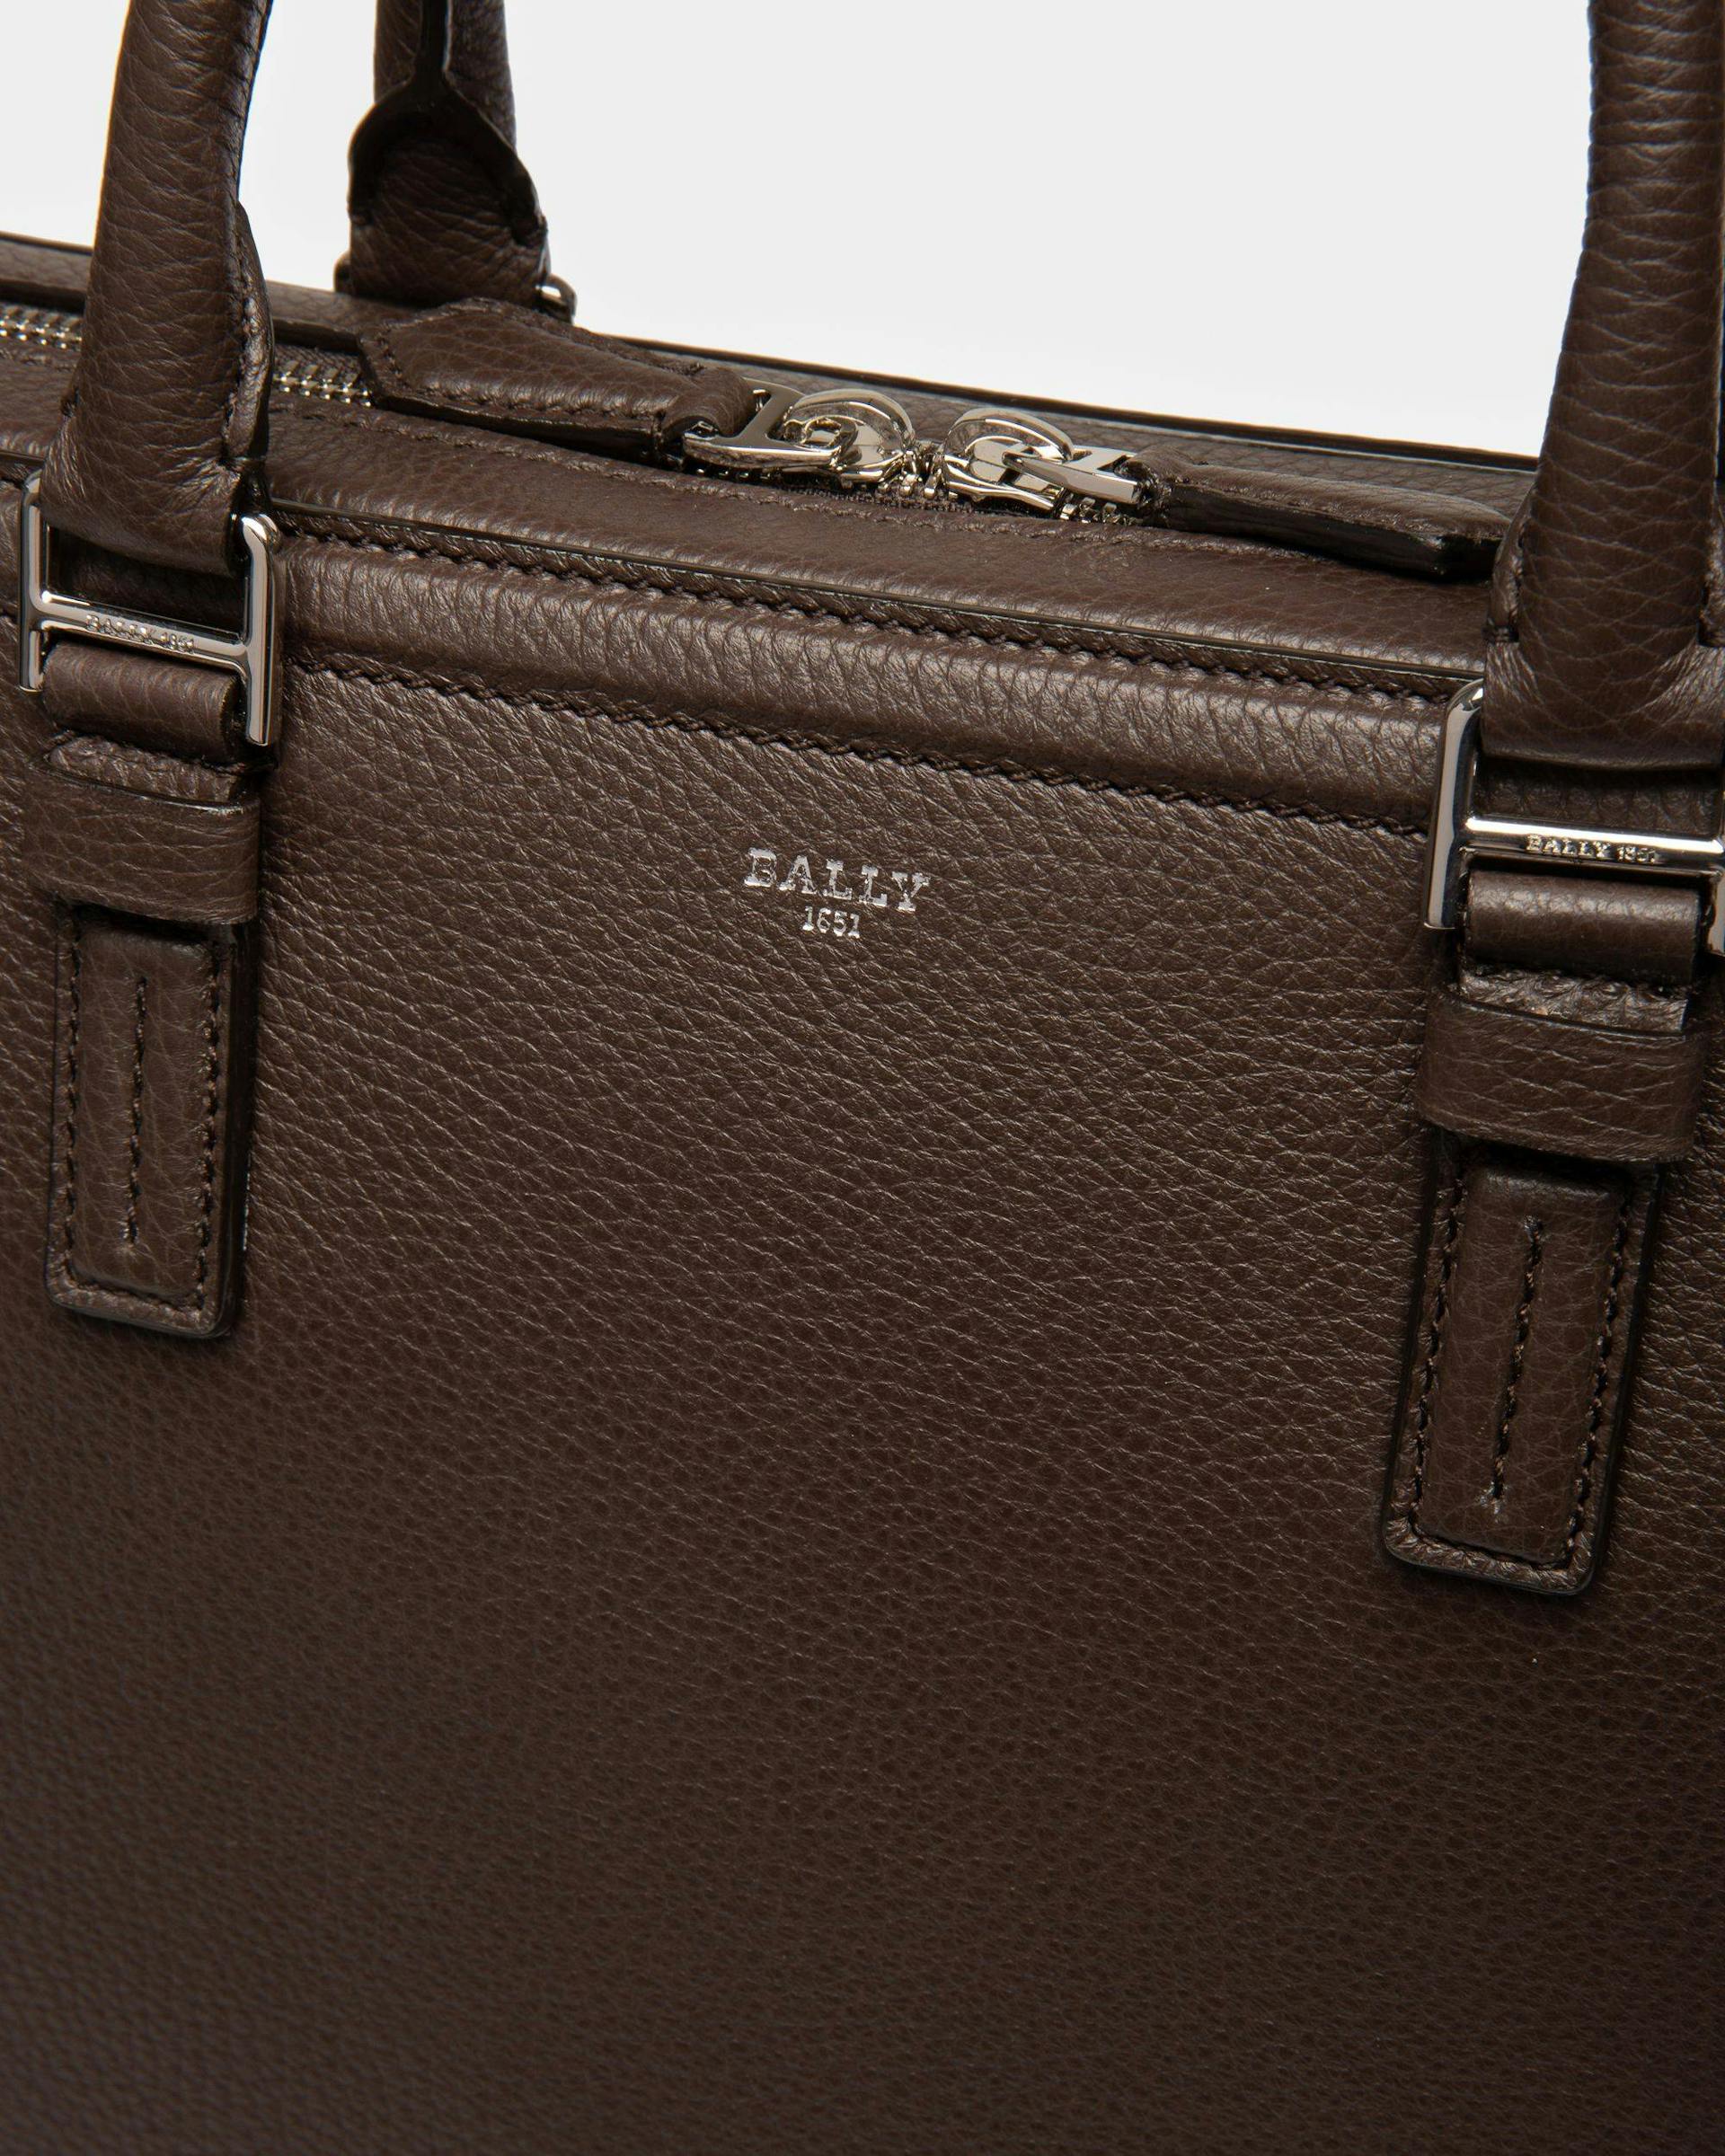 Sergy Leather Business Bag In Ebony Brown - Men's - Bally - 05